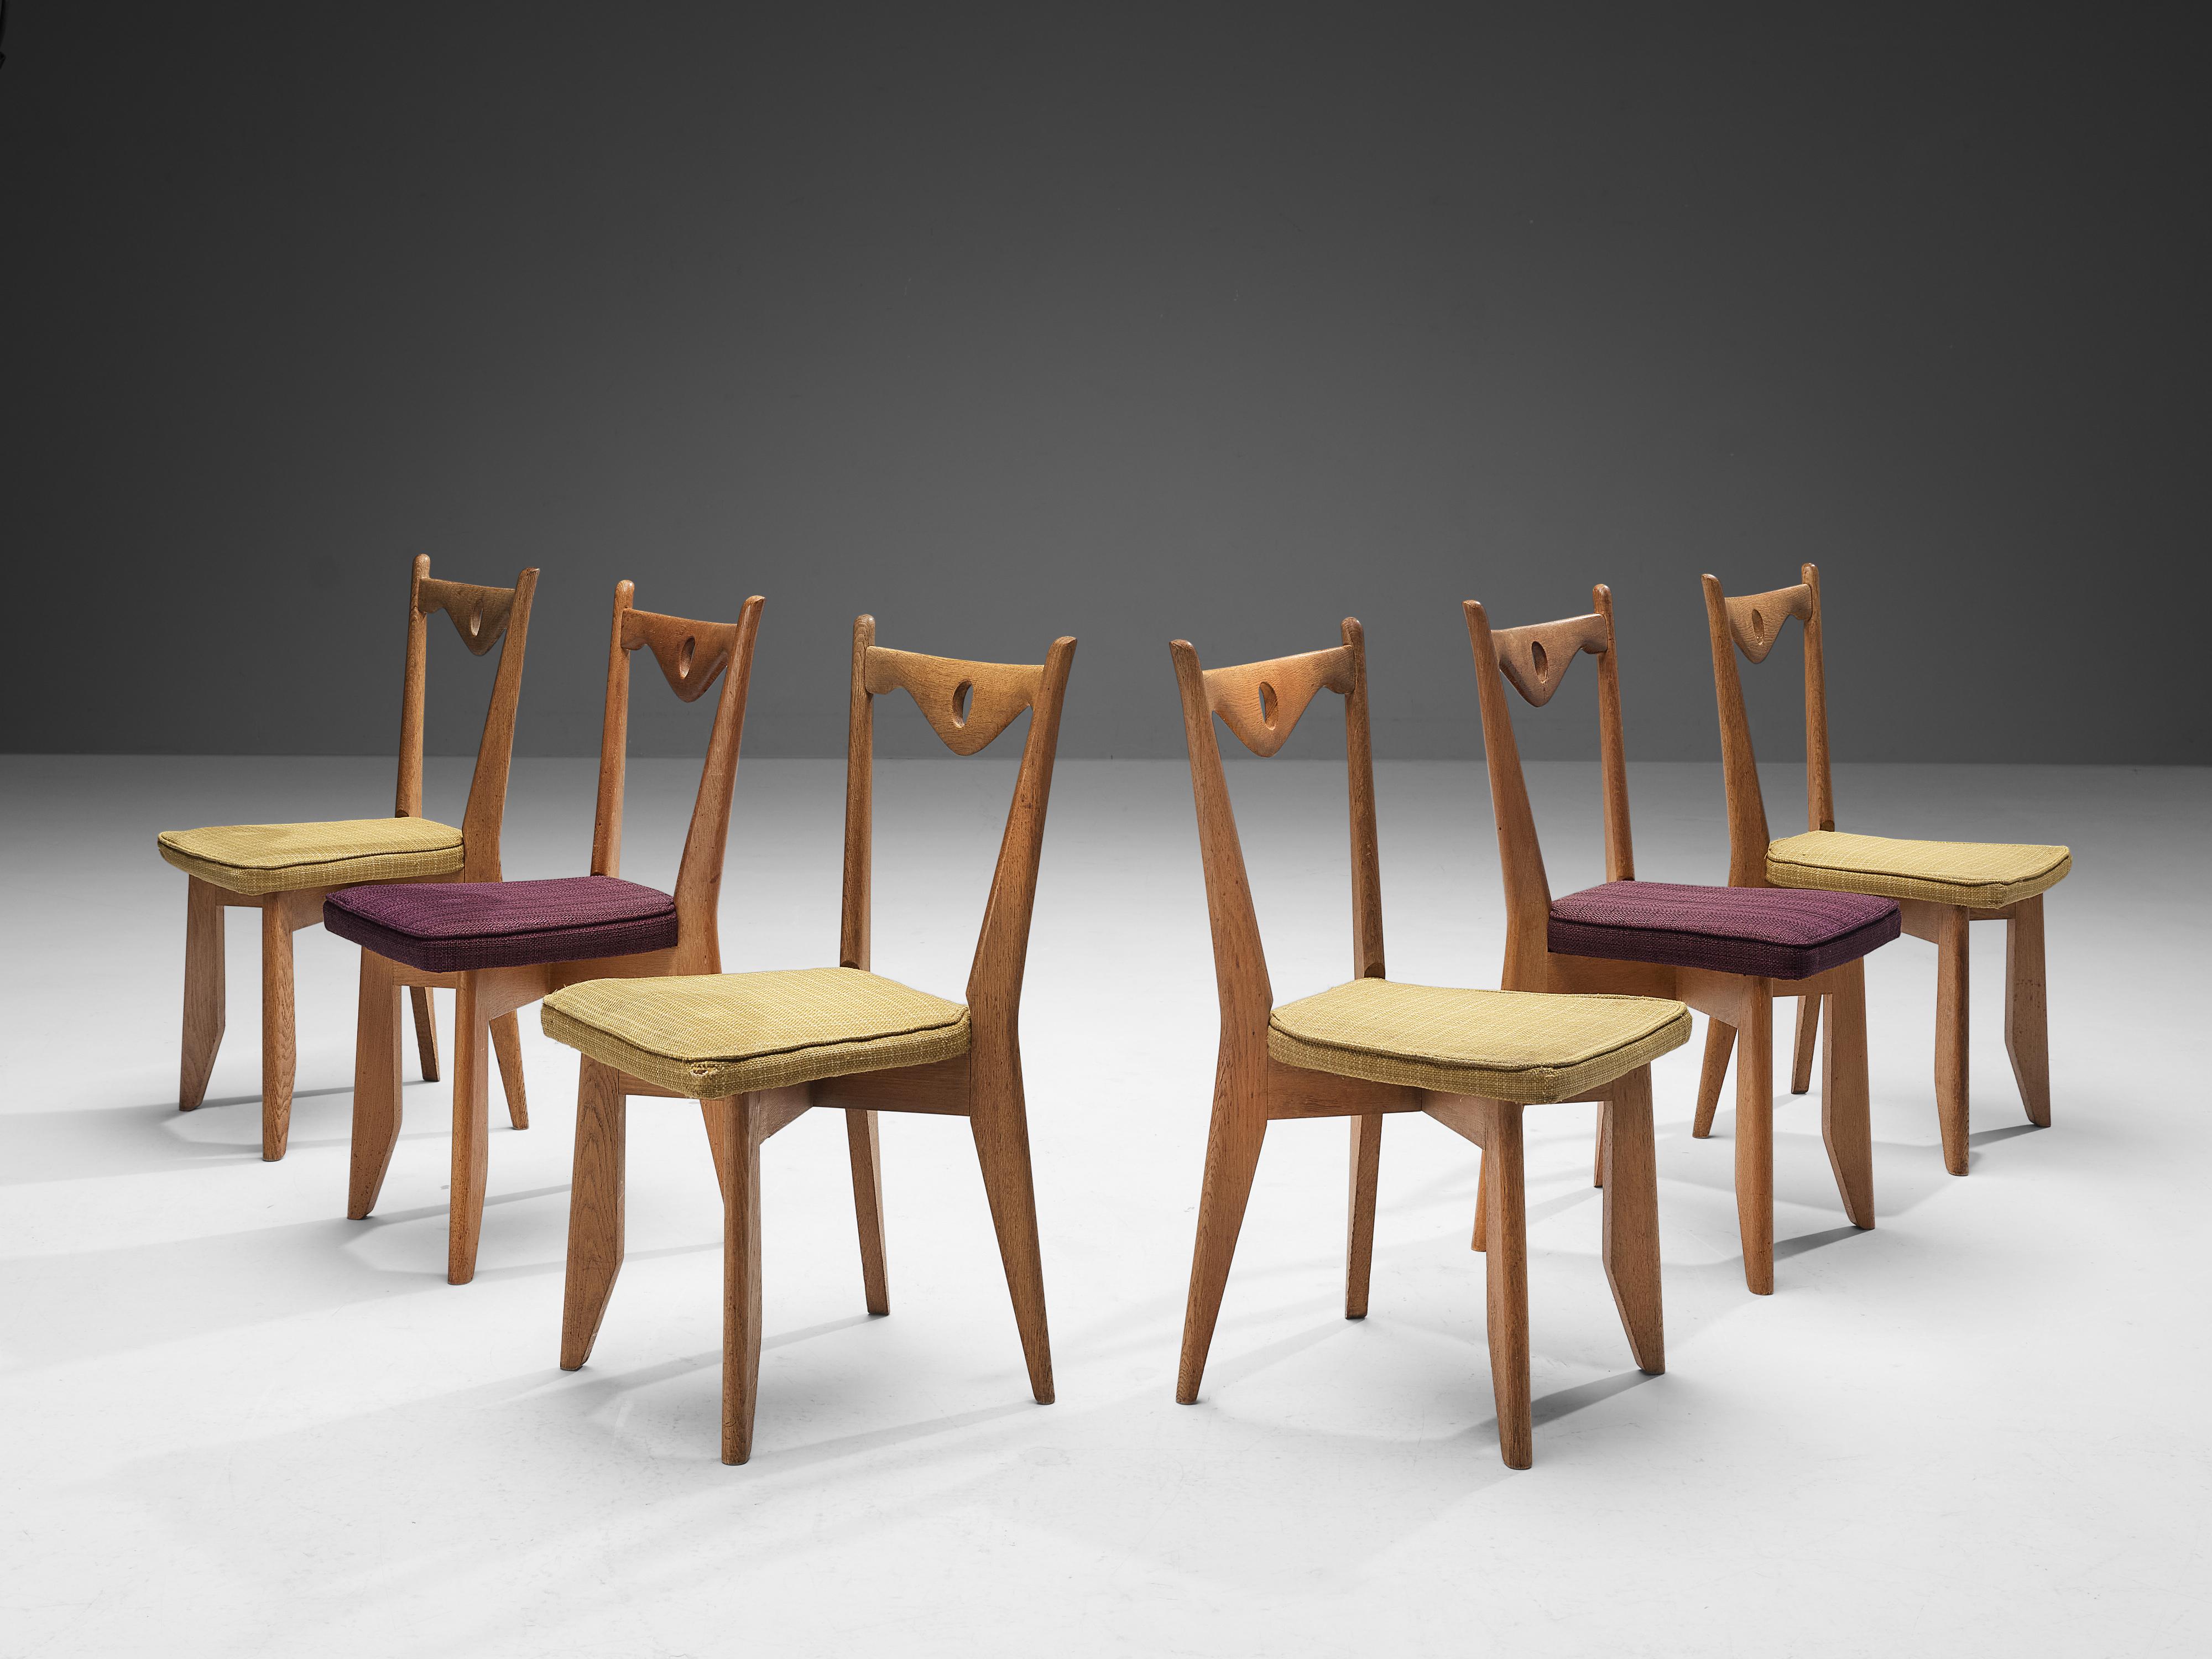 Guillerme et Chambron for Votre Maison, set of six dining chairs, oak, fabric, France, 1960s.

These chairs have characteristic frames with tapered legs and a sculptural back with a downwards facing peak backrest finished with a hole in the middle.